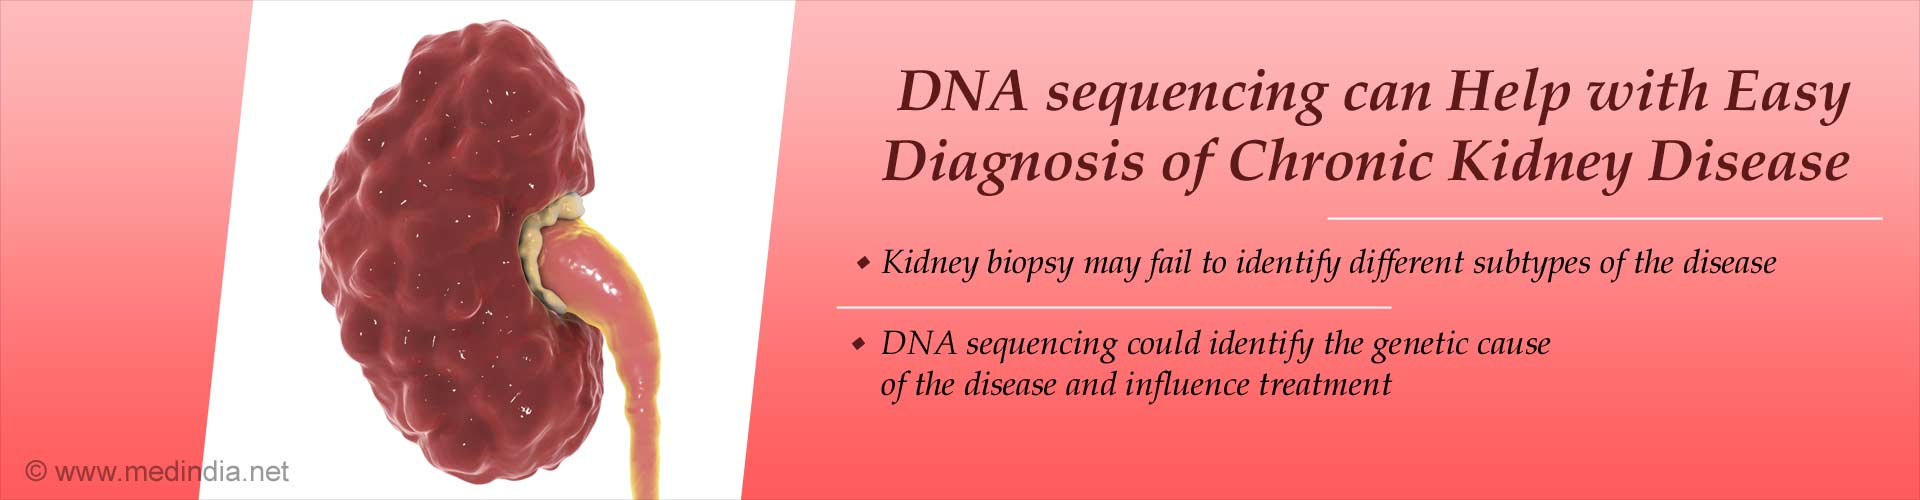 DNA sequencing can help with easy diagnosis of chronic kidney disease
- kidney biopsy may fail to identify different subtypes of the disease
- DNA sequencing could identify the genetic cause of the disease and influence treatment
